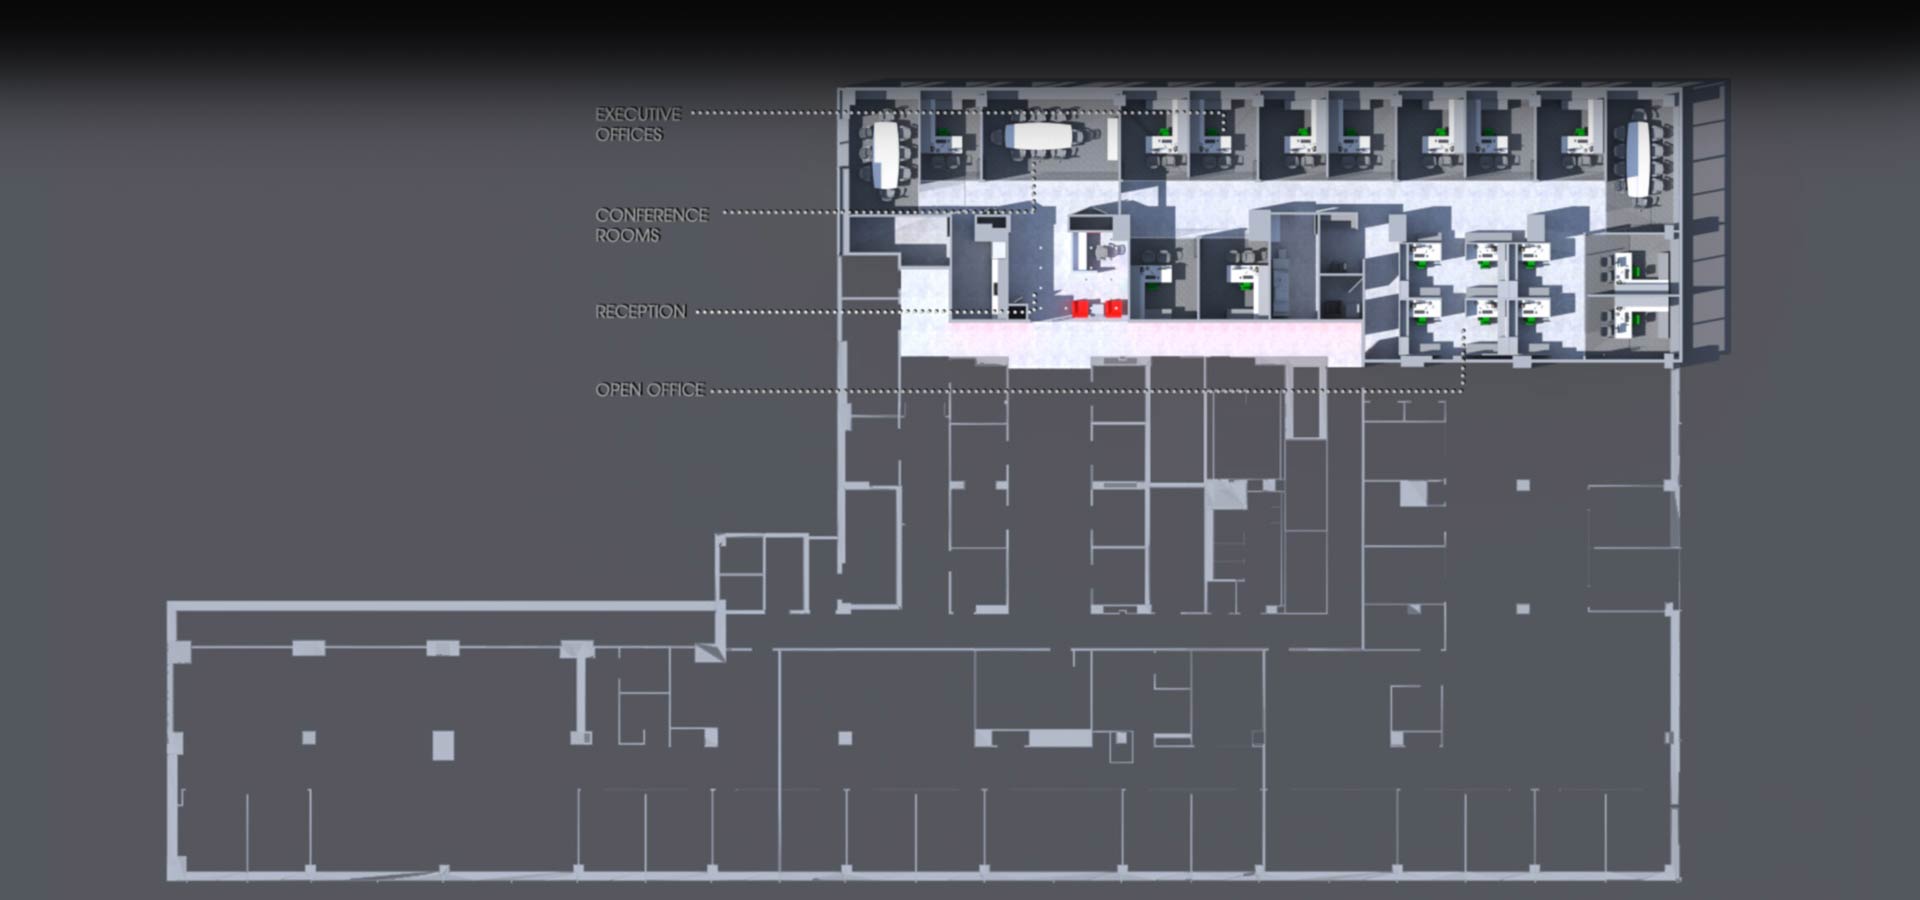 blueprint of architectural plans of nyc nintendo office designed and architected by kohn architecture nyc